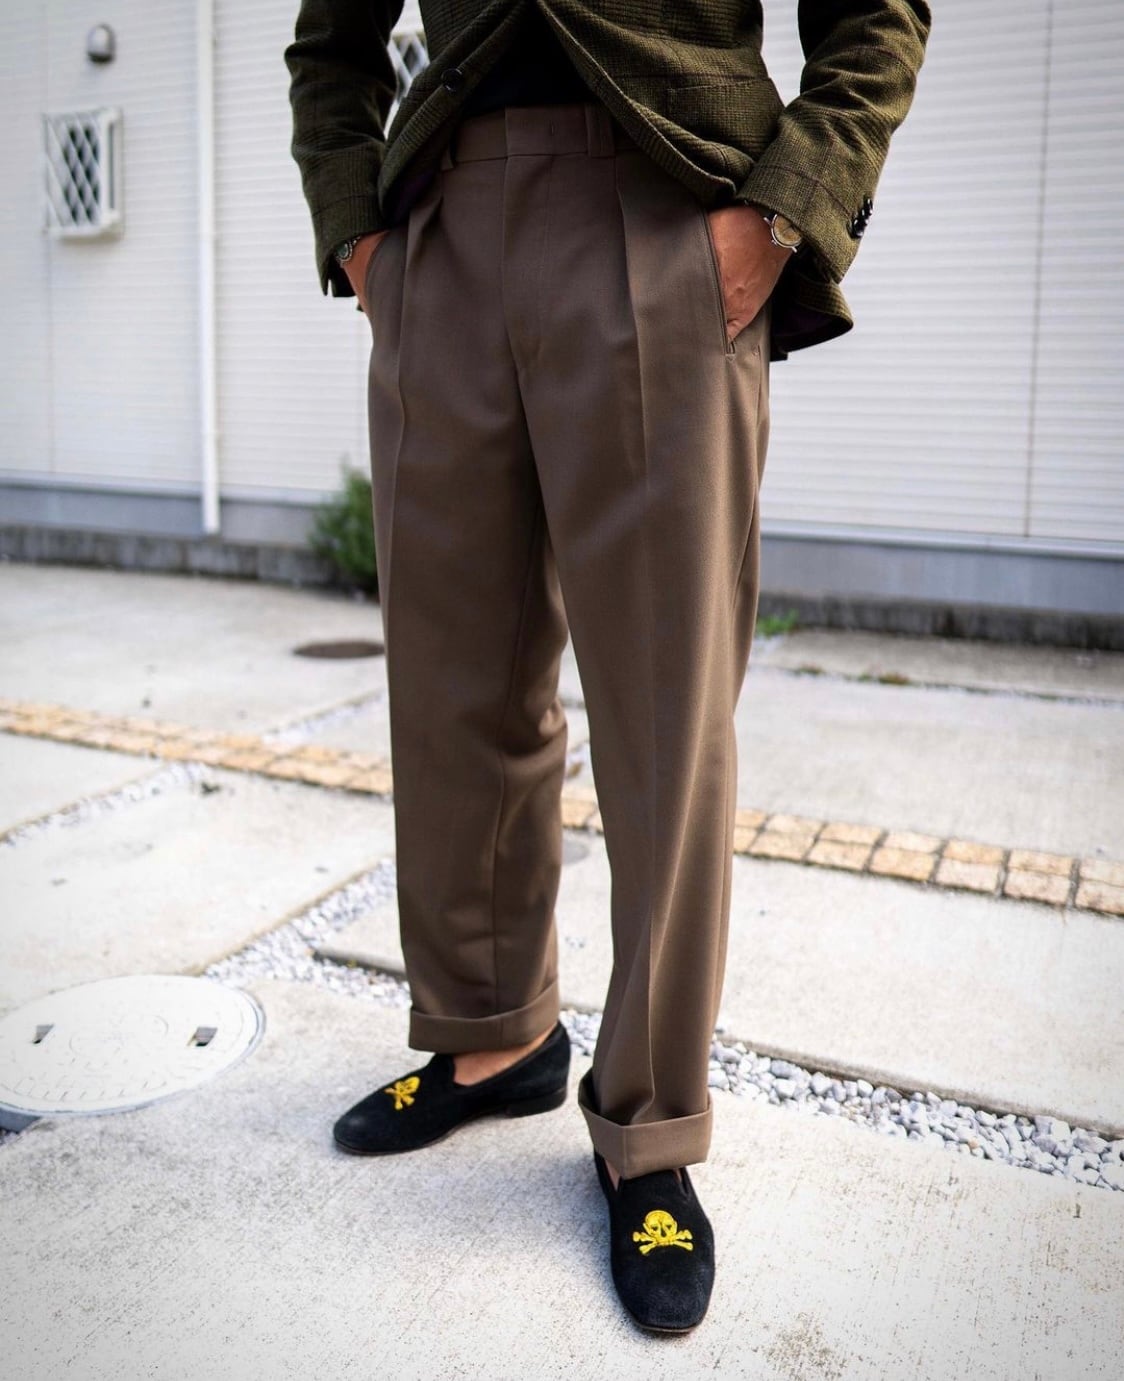 Tangent French Army Adjuster Pants - チノパン